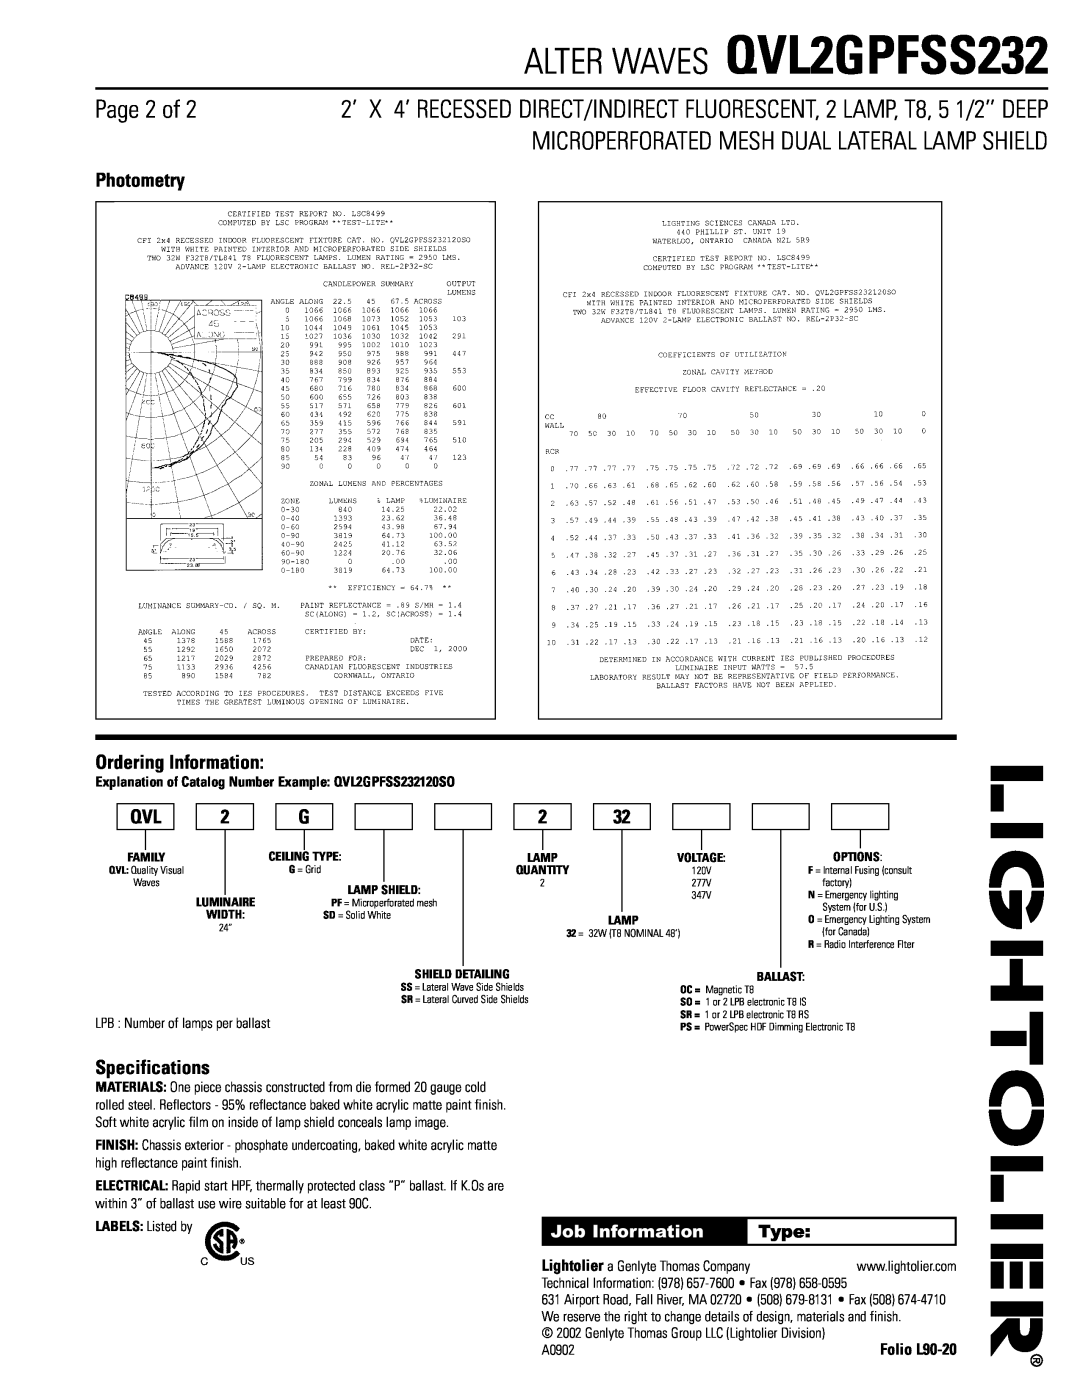 Lightolier Page 2 of, Photometry, Ordering Information, Specifications, ALTER WAVES QVL2GPFSS232, Job Information, Type 